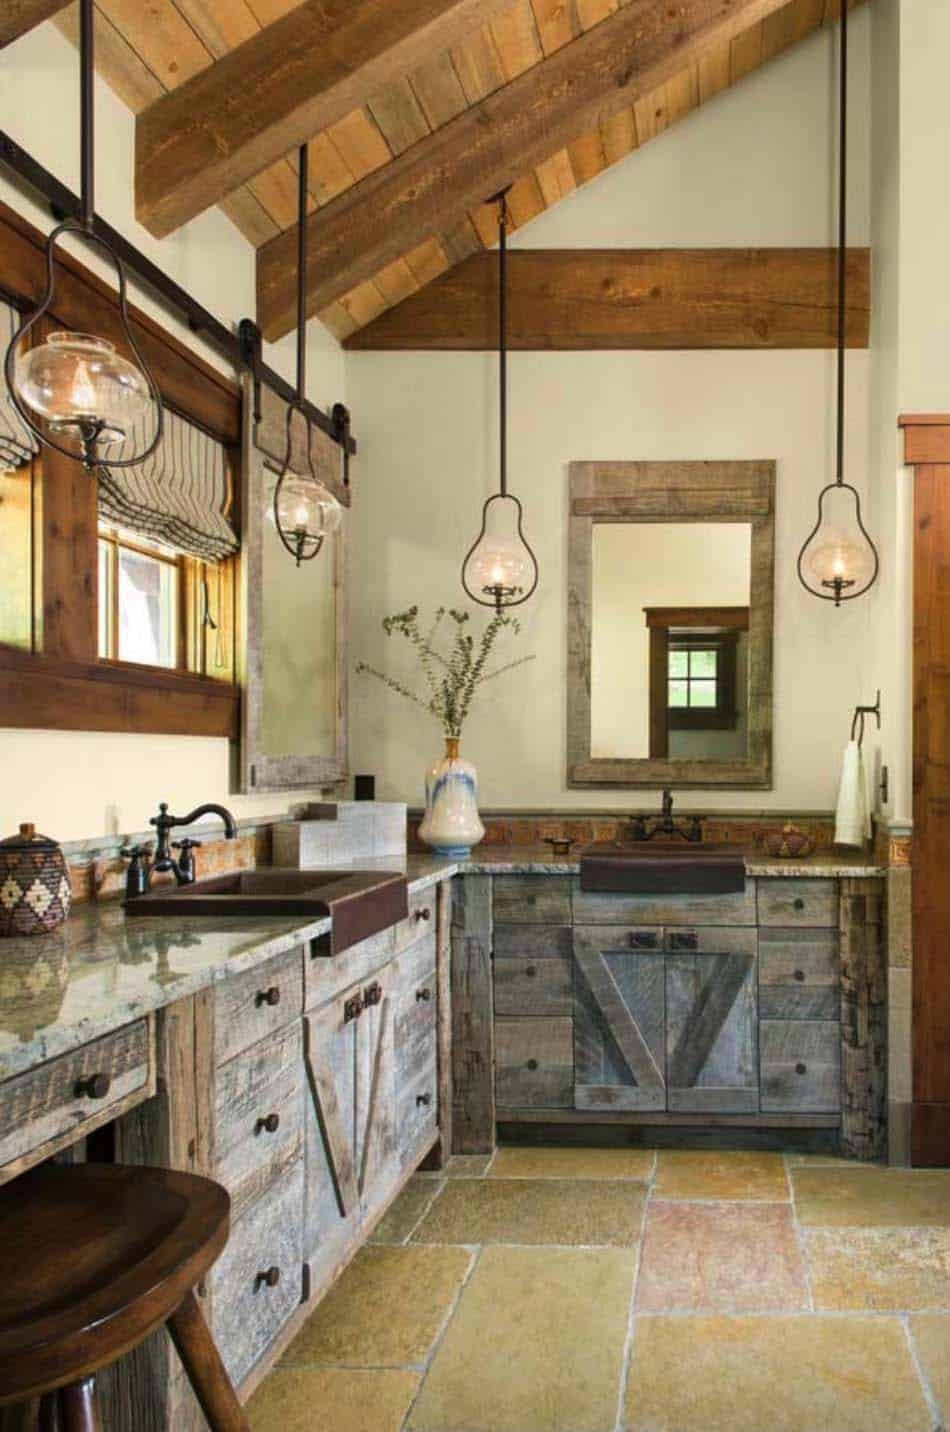 Kitchen And Bathroom Decor
 Inviting ranch style home offers rustic warmth in the